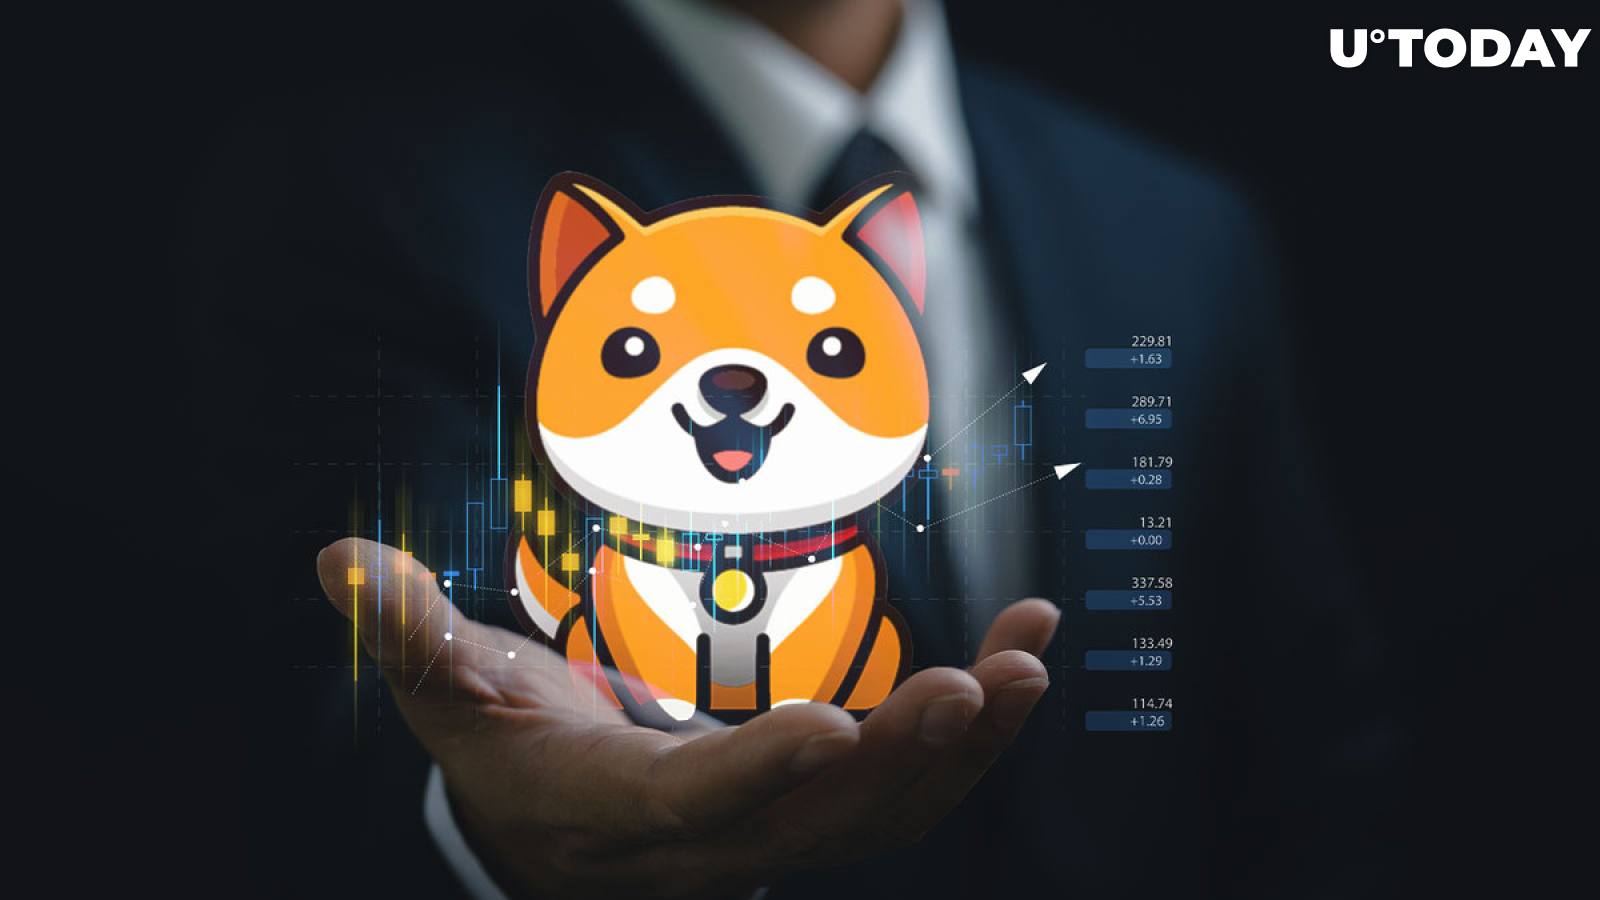 BabyDoge Holder Number Again Surpasses SHIB's After Reaching New All-Time High